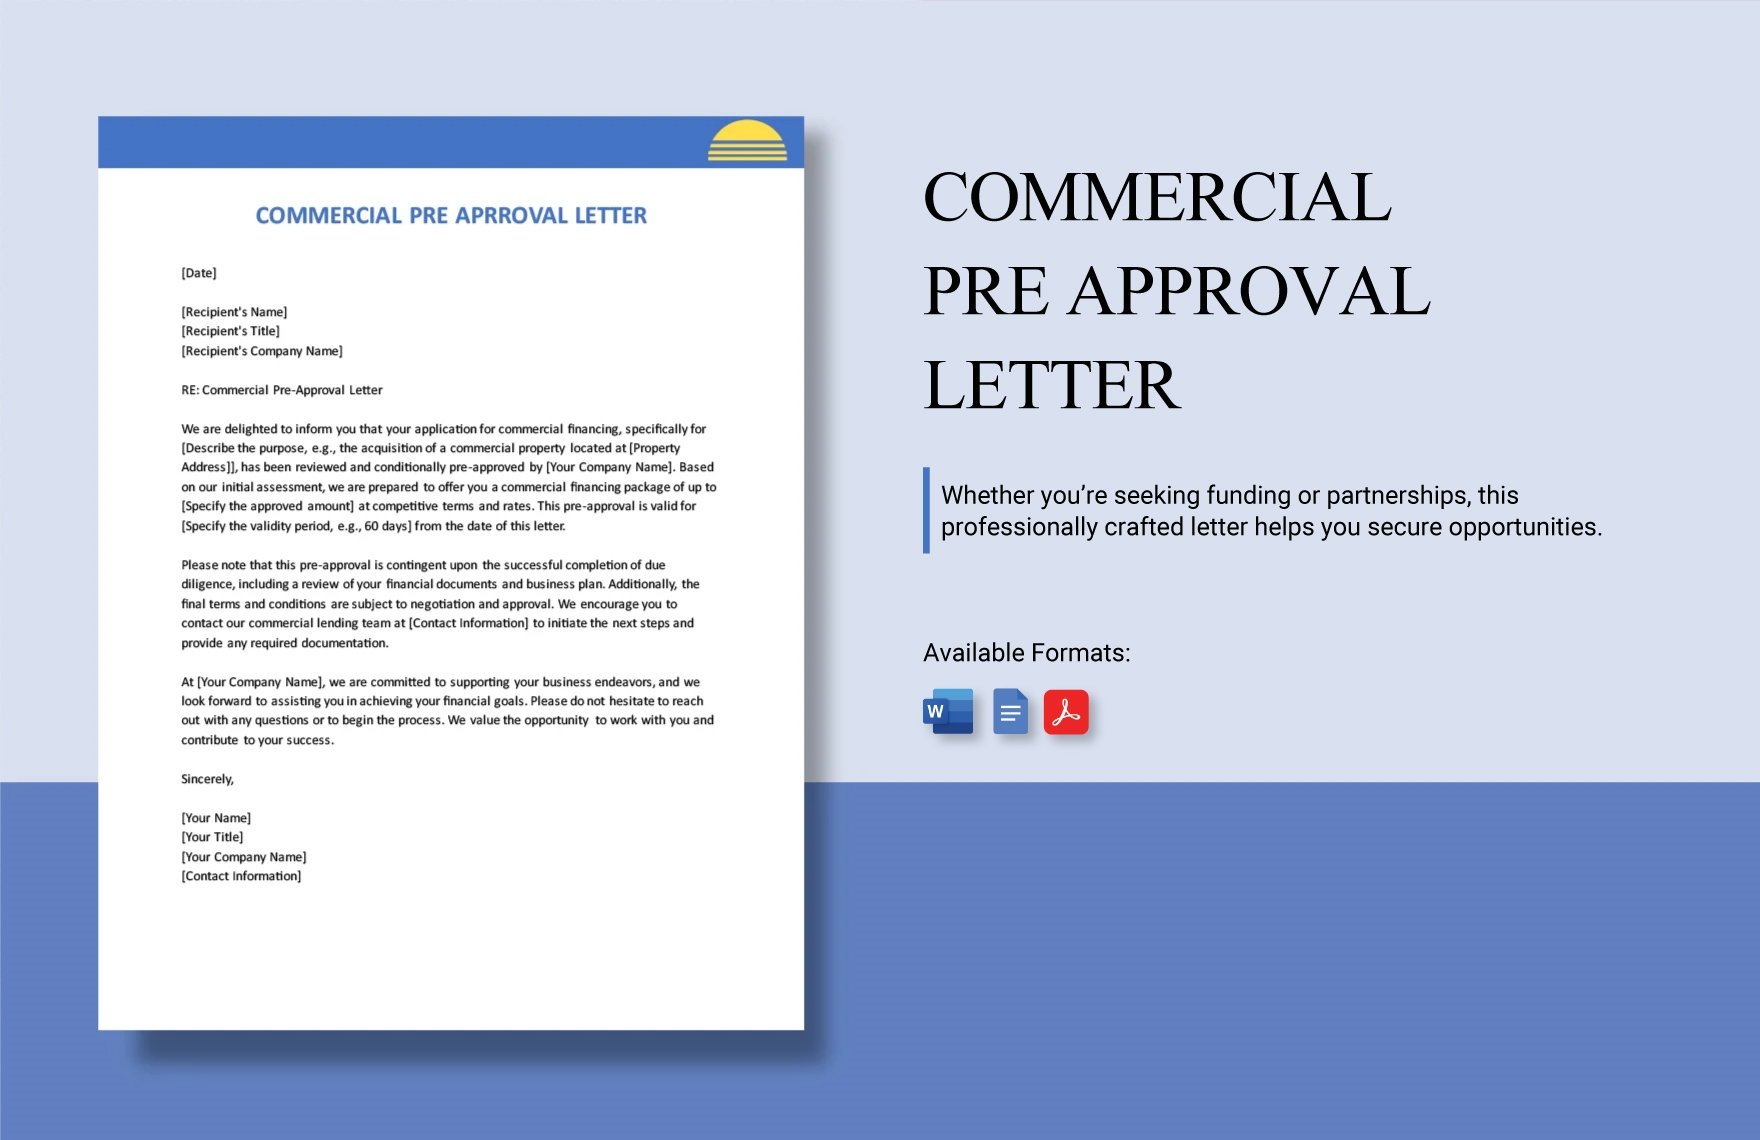 Commercial Pre Approval Letter in Word, Google Docs, PDF